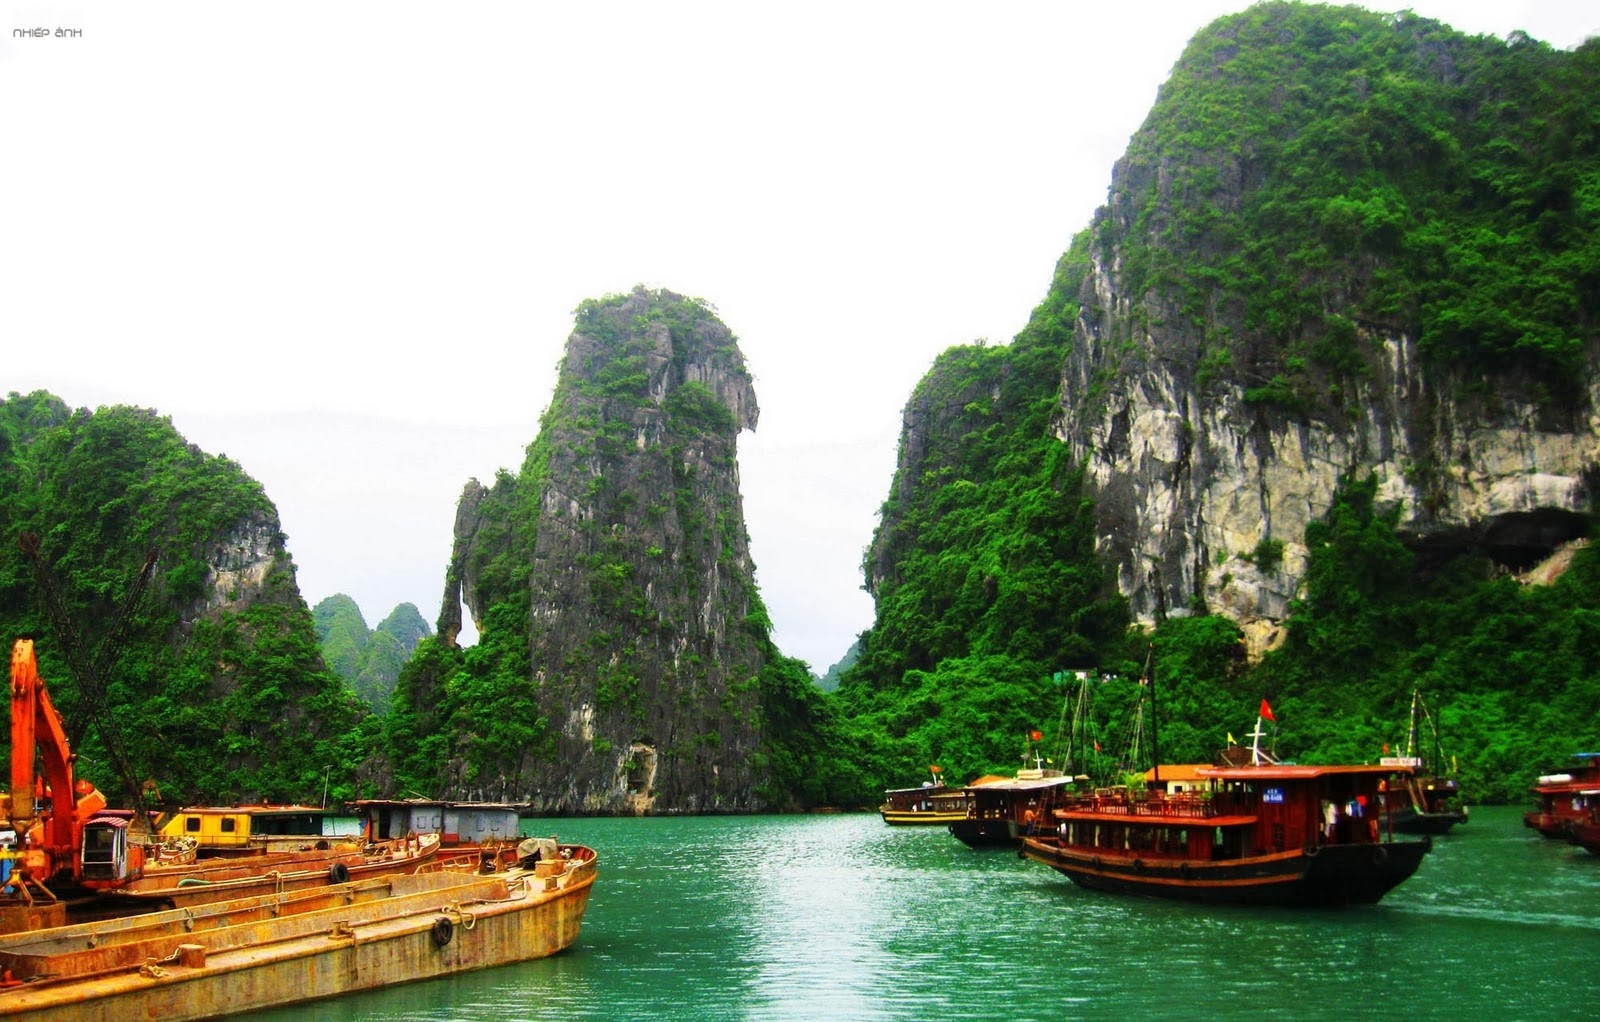 Immerse yourself in the stunning natural landscapes of Halong Bay, Vietnam